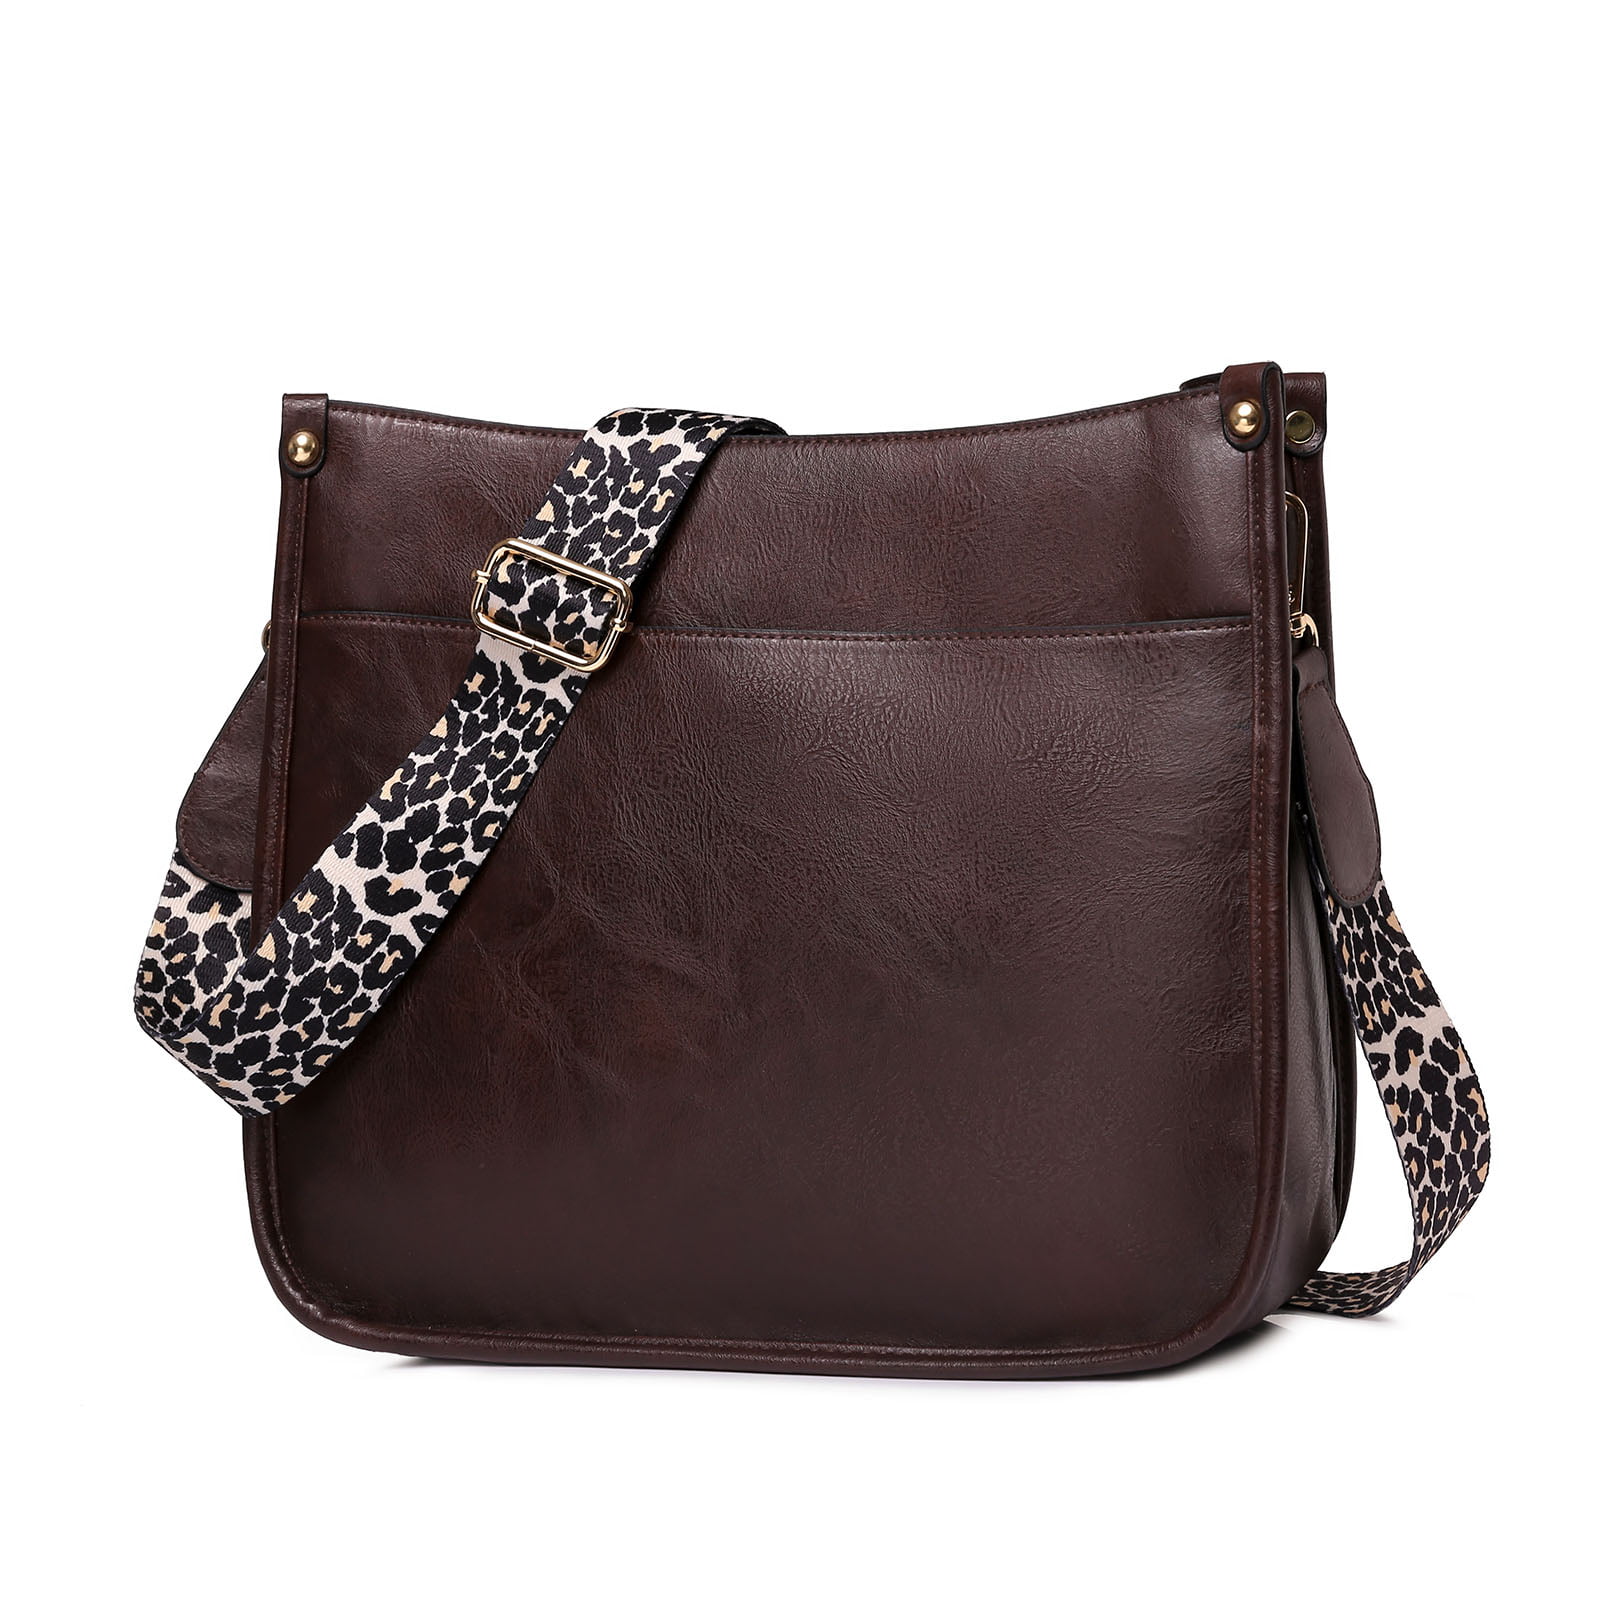 Womens Bags (10% OFF + EXTRA*) | Bags for Women | Coach Outlet Australia